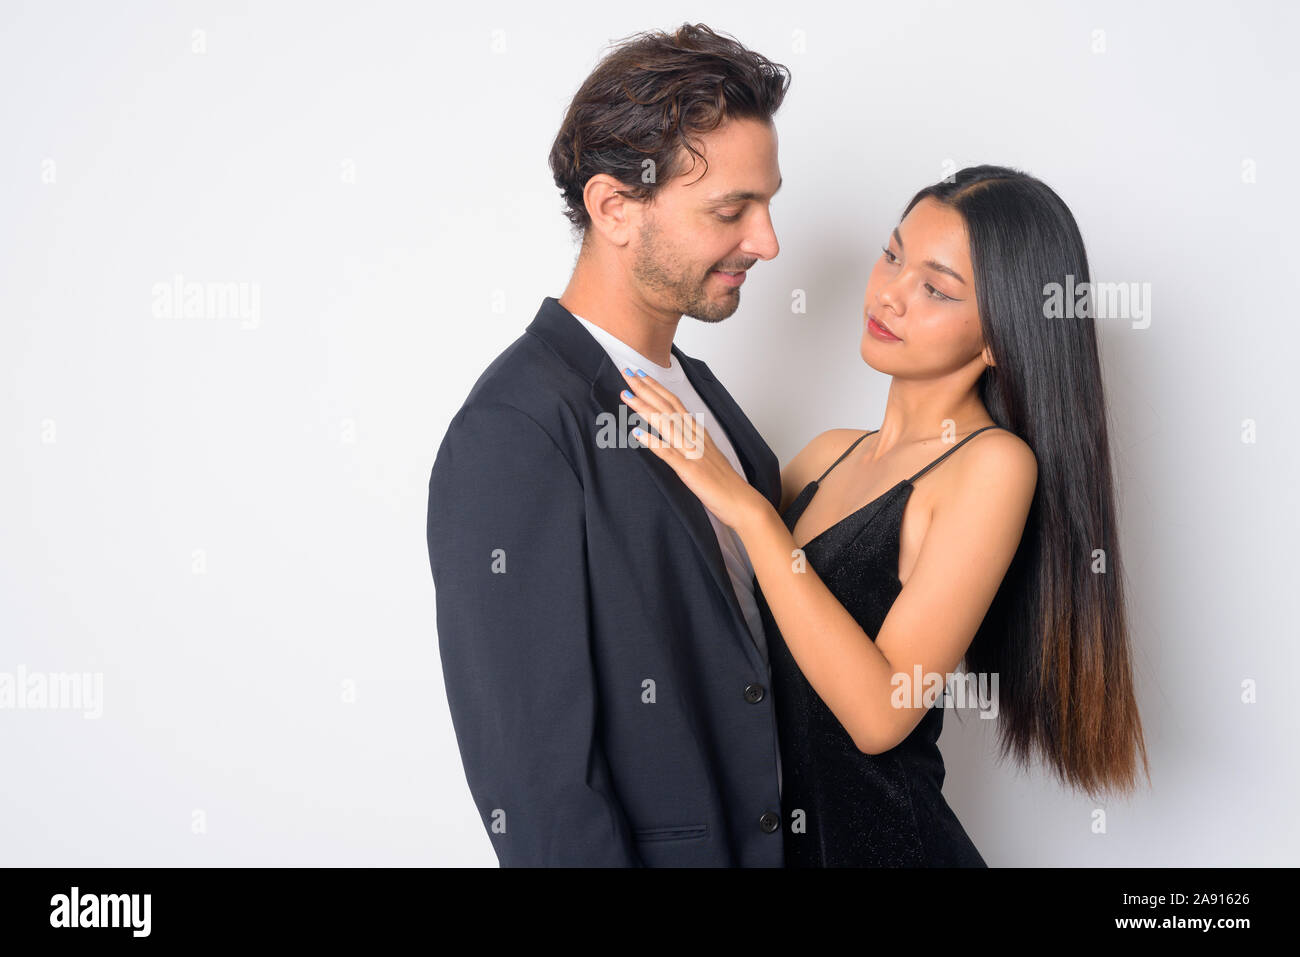 Portrait of multi ethnic business couple facing each other Stock Photo